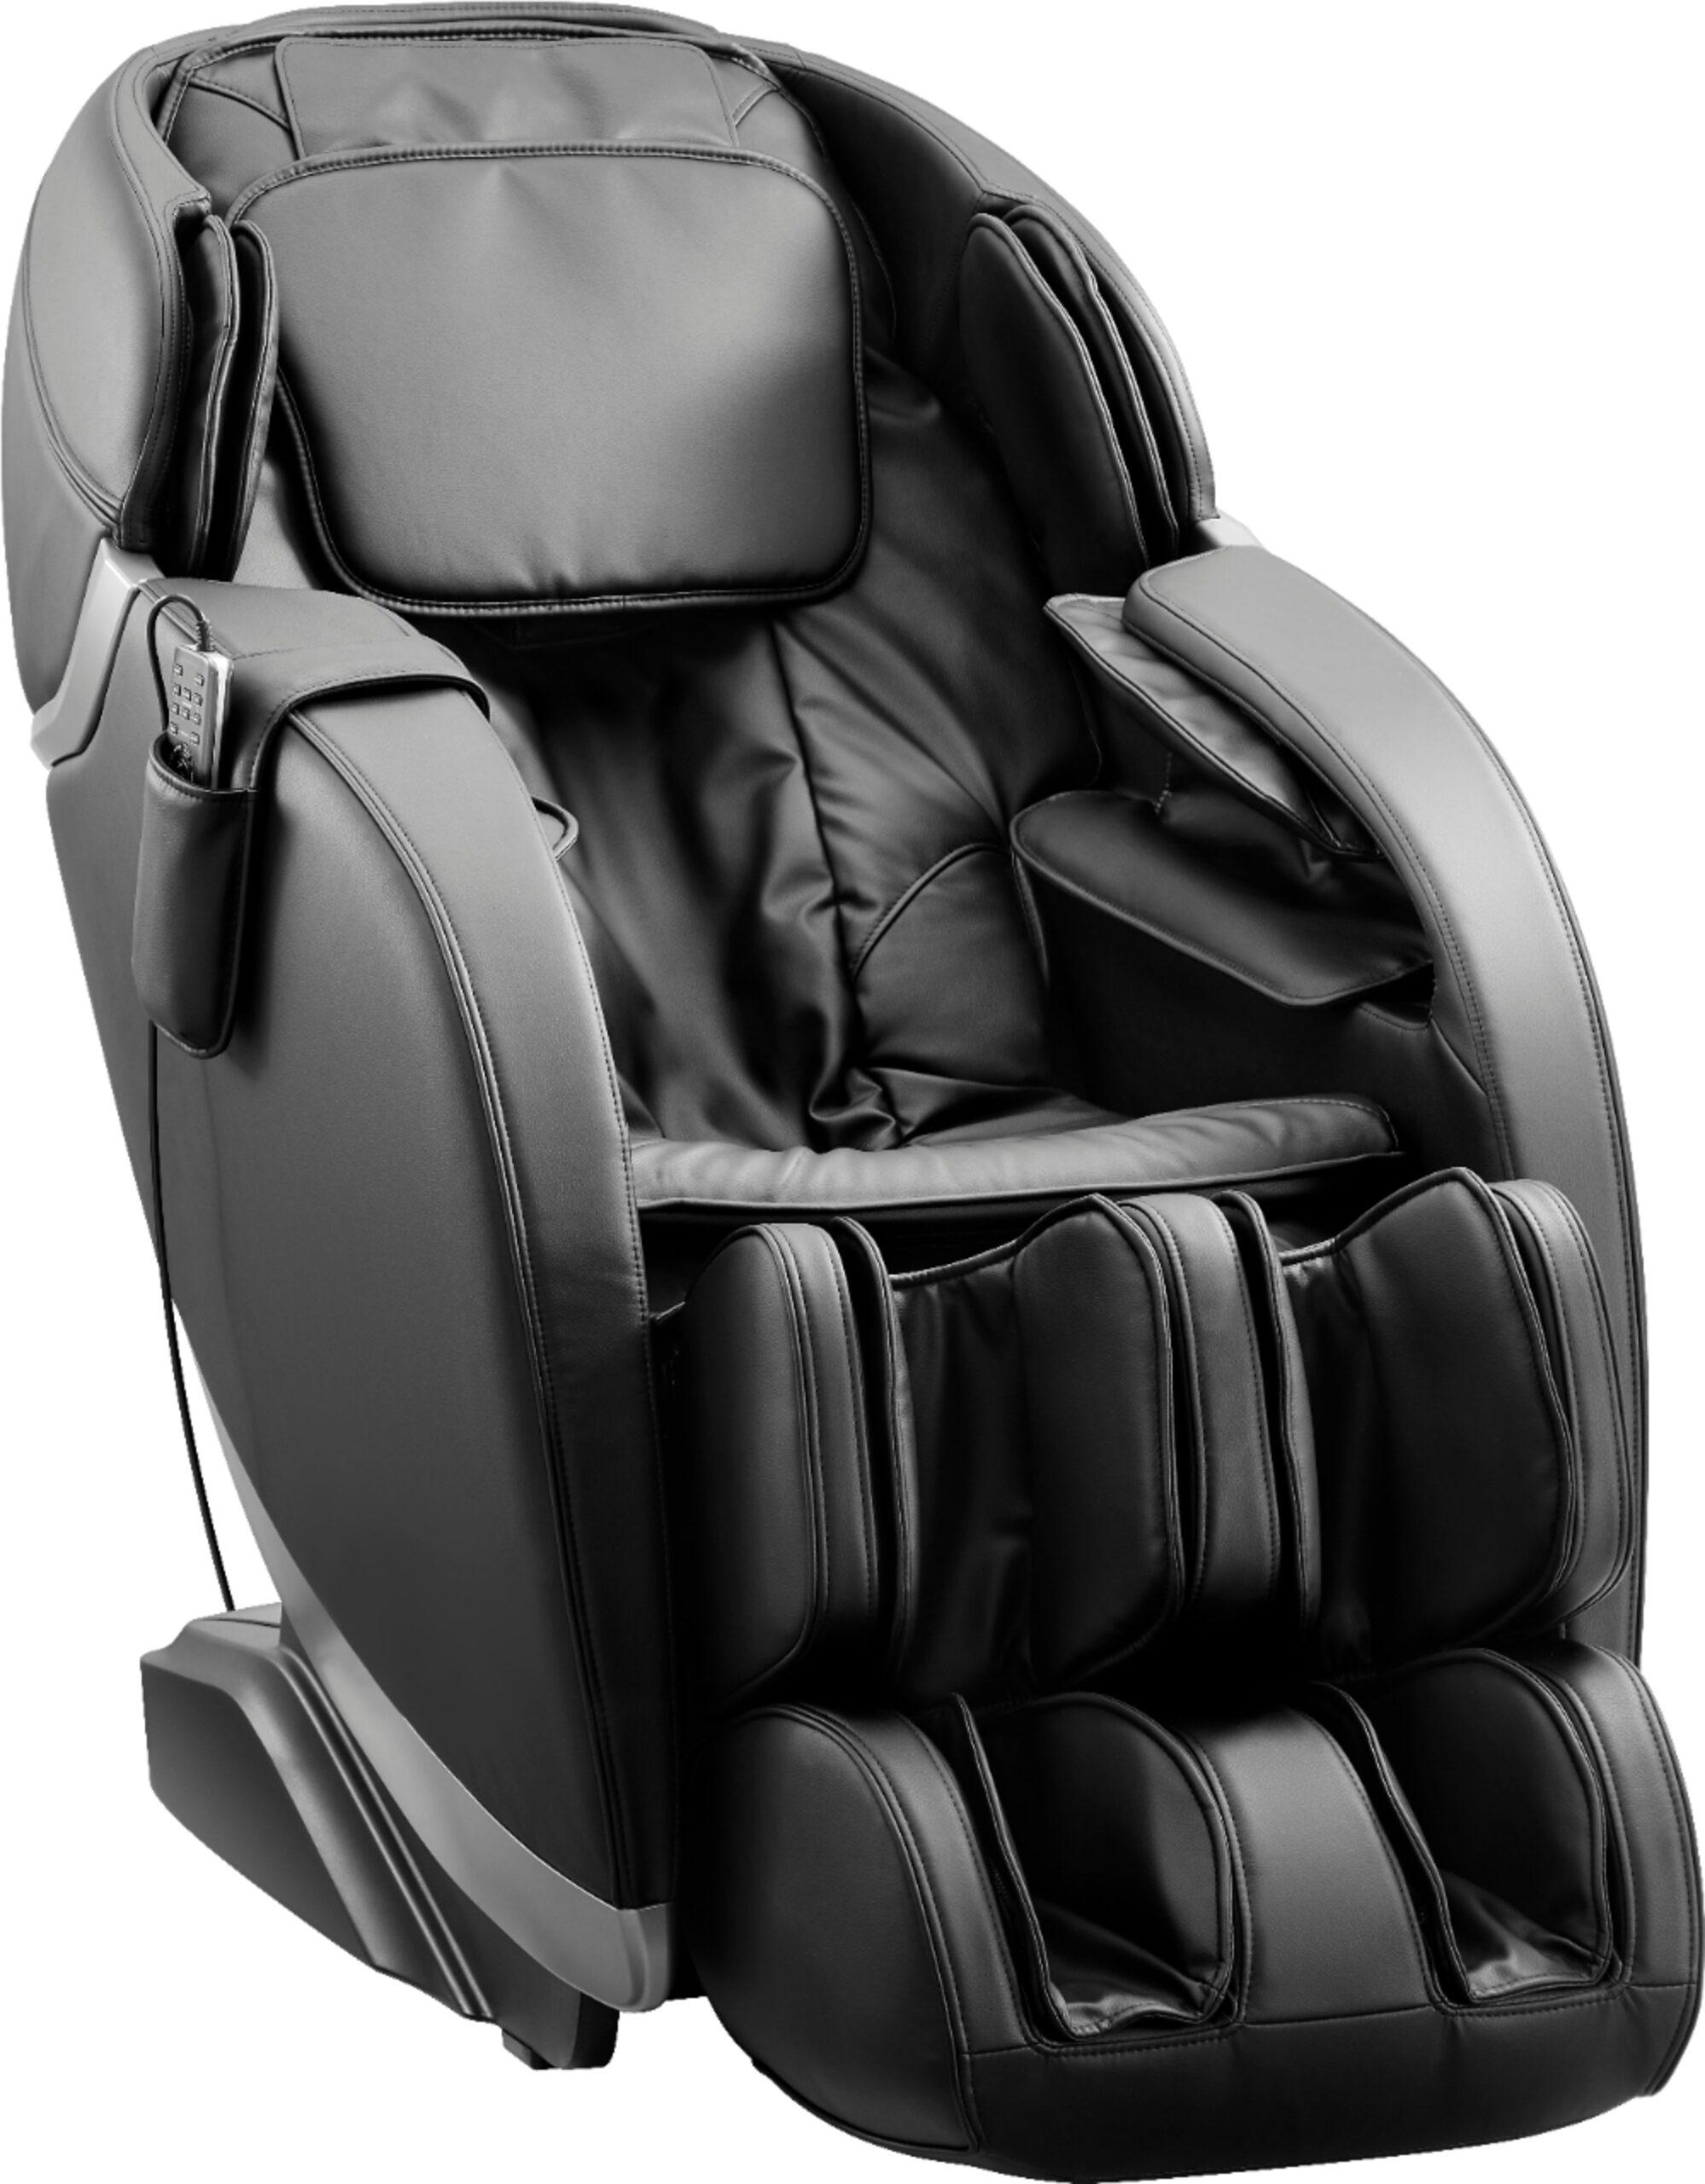 This deal won't last! $1,500 off Insignia's Zero Gravity Massage Chair. 72352145 6405497 sd scaled